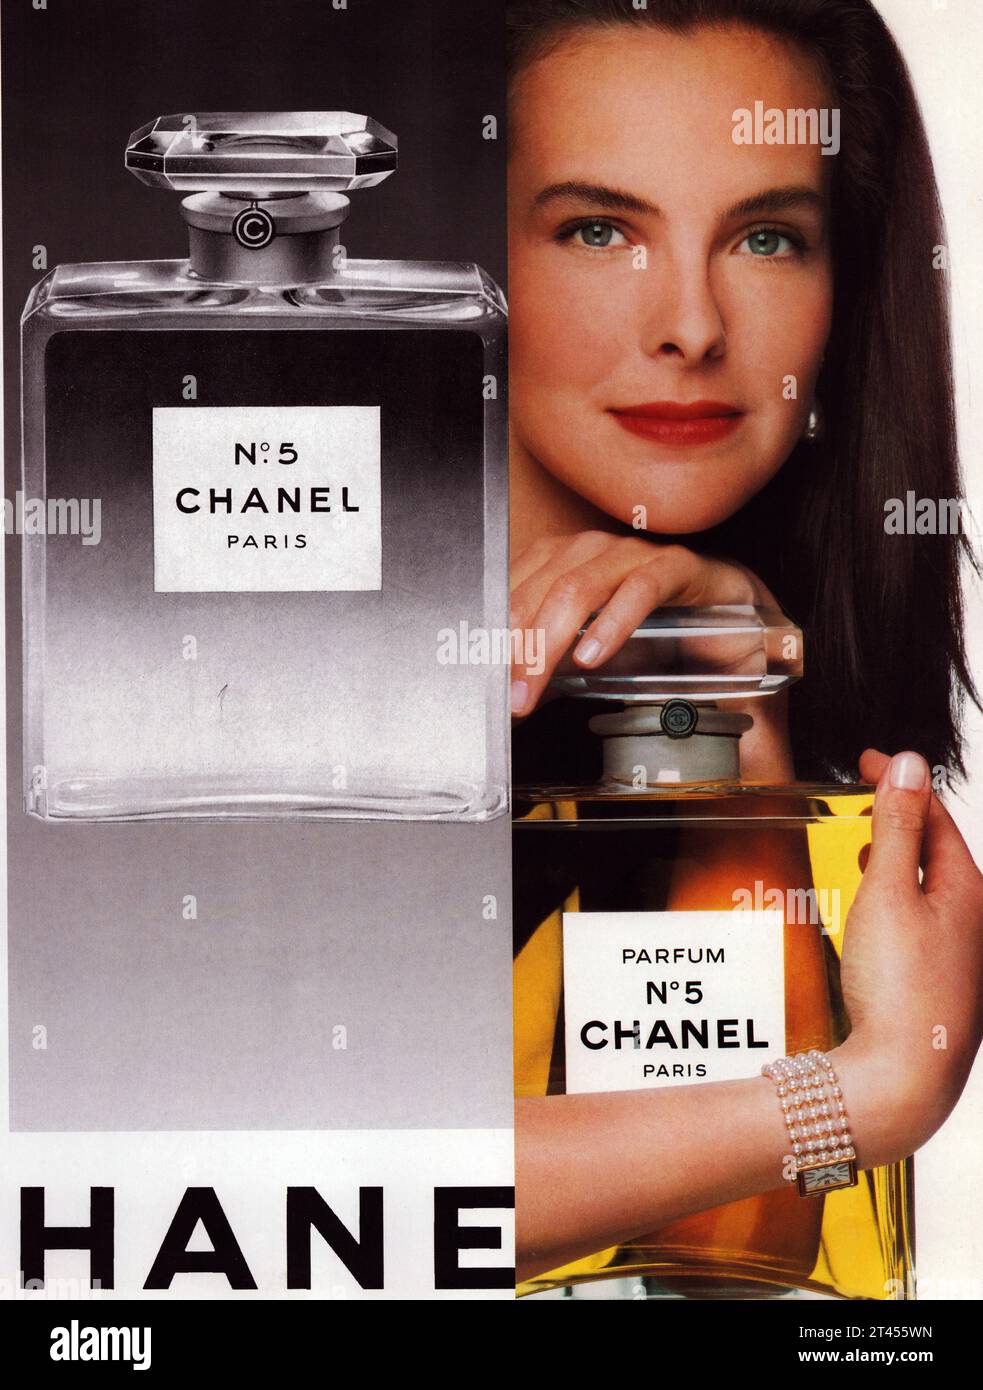 Chanel No 5 Paris affiche Chanel No 5 perfumes commercial collage of adverts old and new; model holding Chanel No5 big perfume bottle Stock Photo